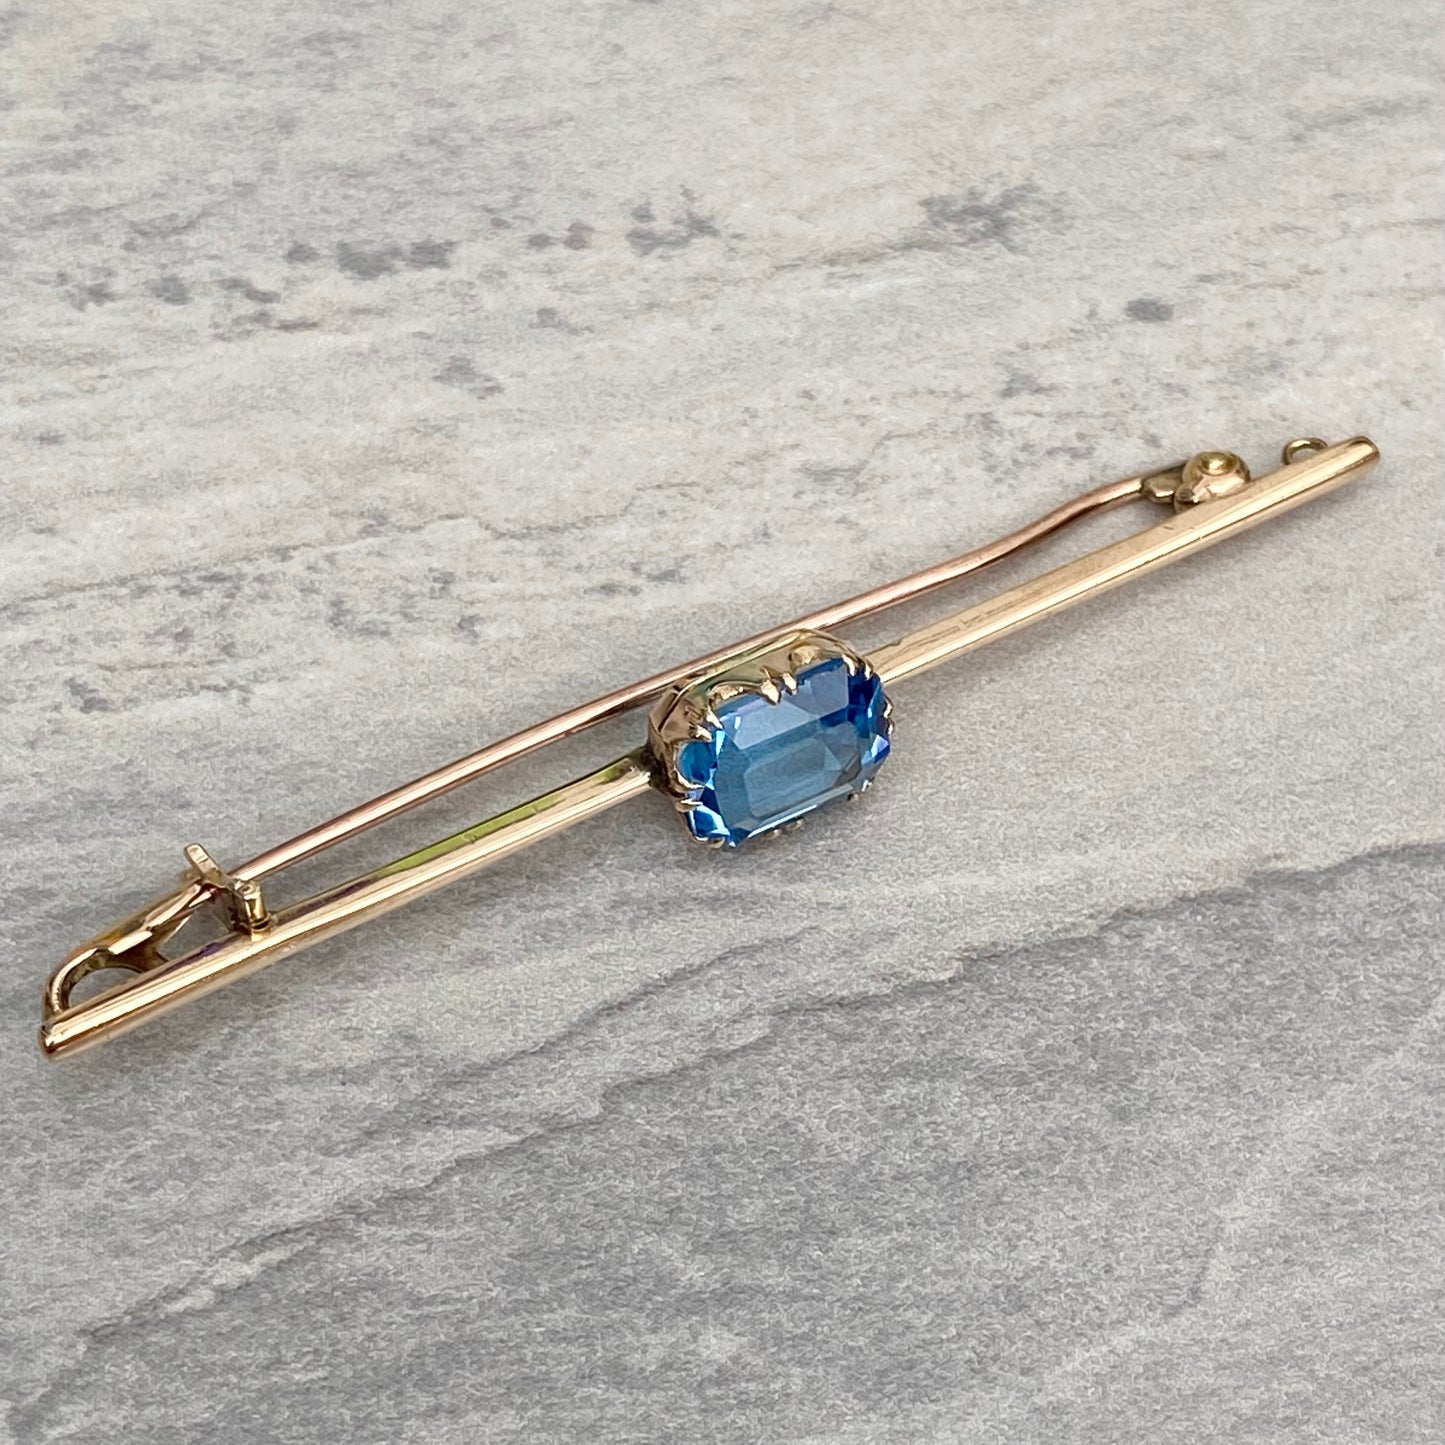 Vintage 9ct yellow gold blue glass brooch